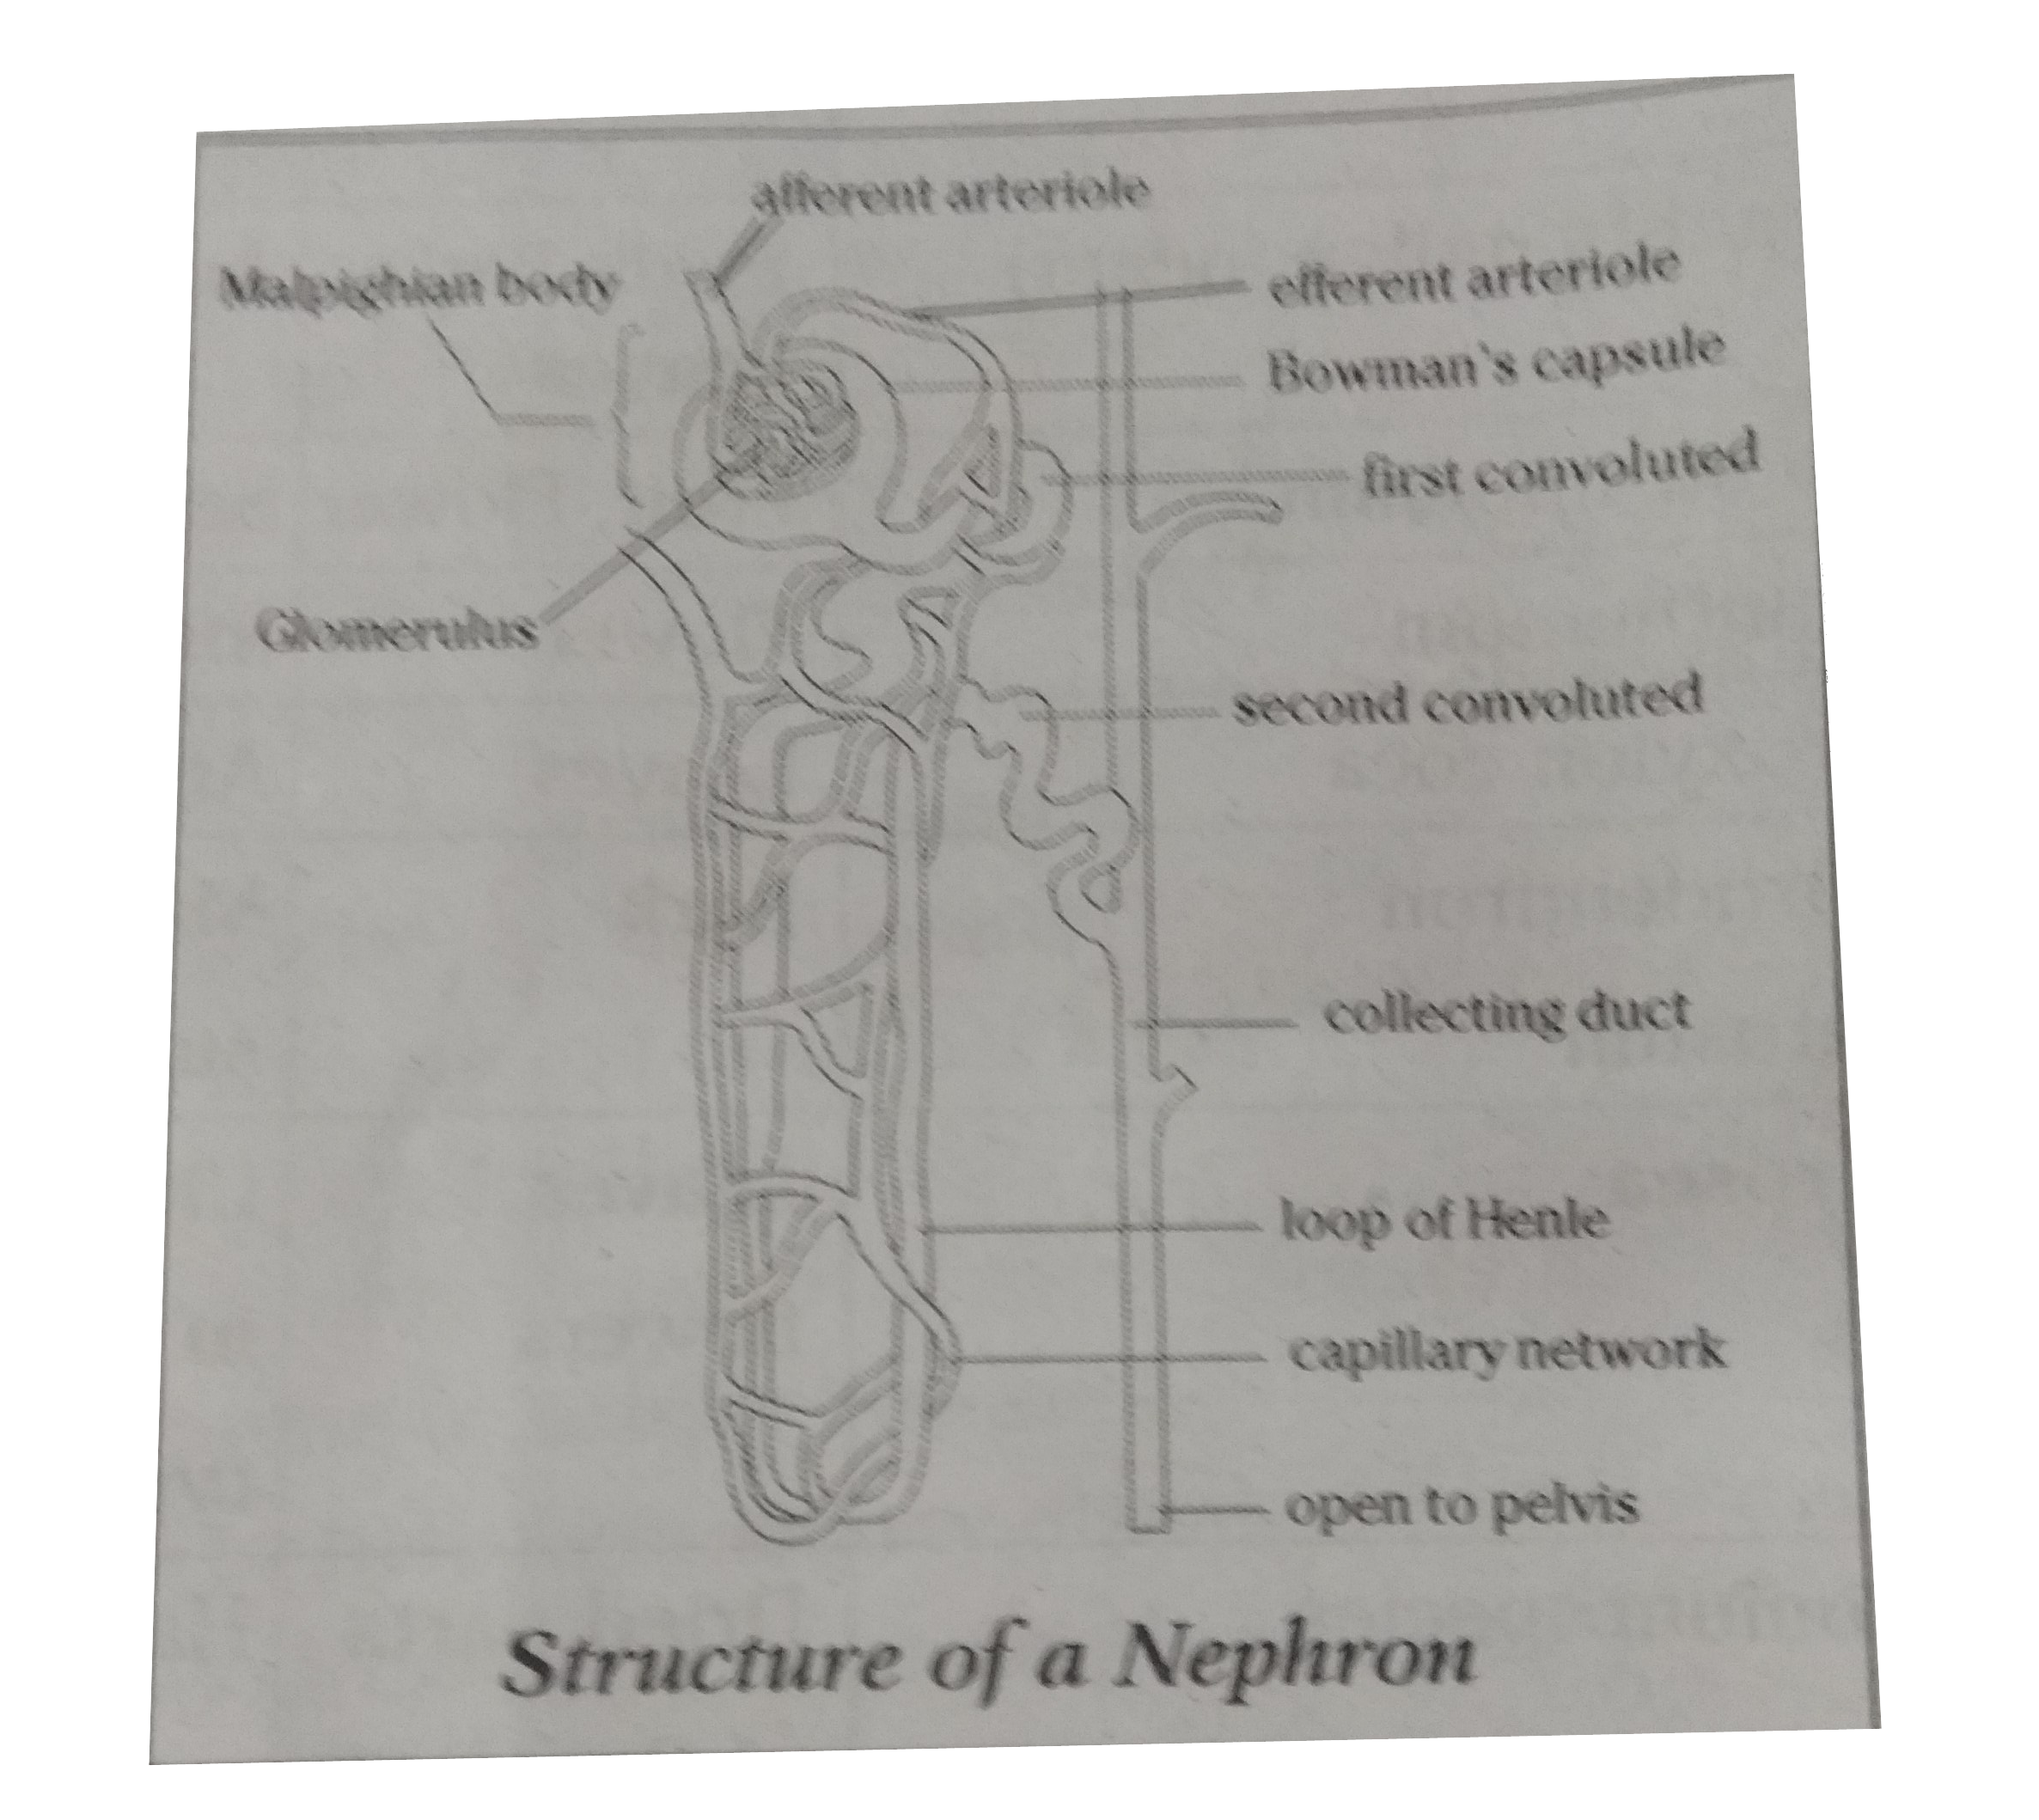 Draw a labelled diagram of nephron